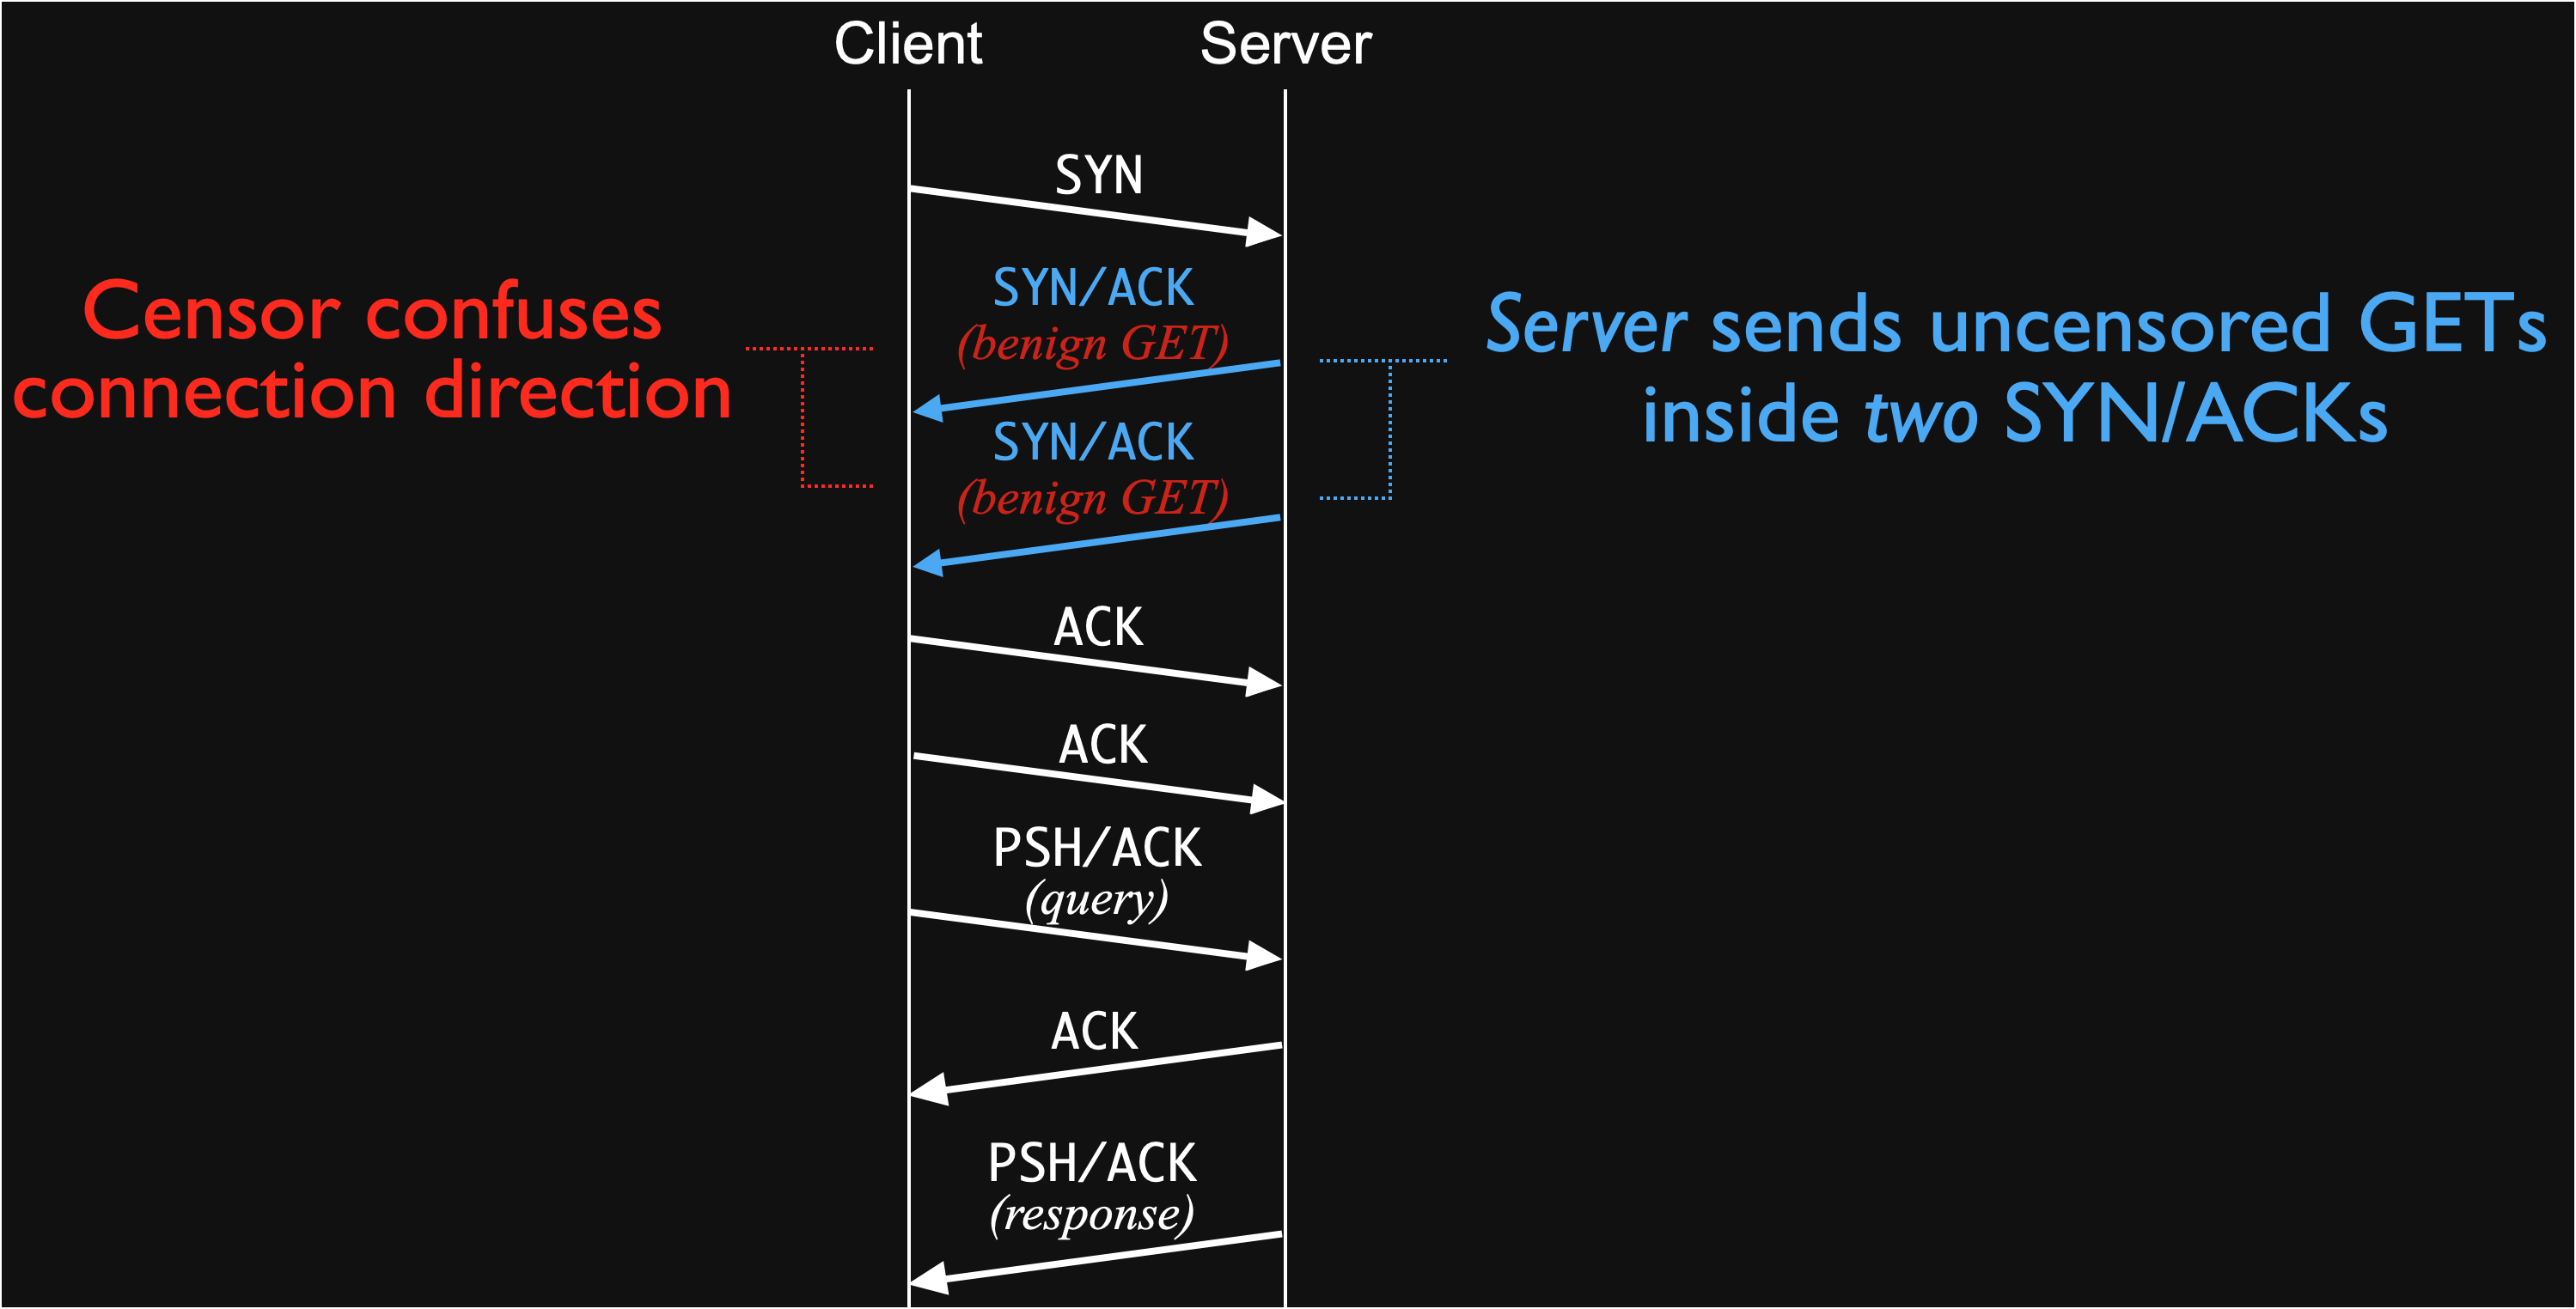 A server-side evasion strategy that is successful in Kazakhstan. The server&rsquo;s strange data-bearing SYN/ACKs confuse the censor.